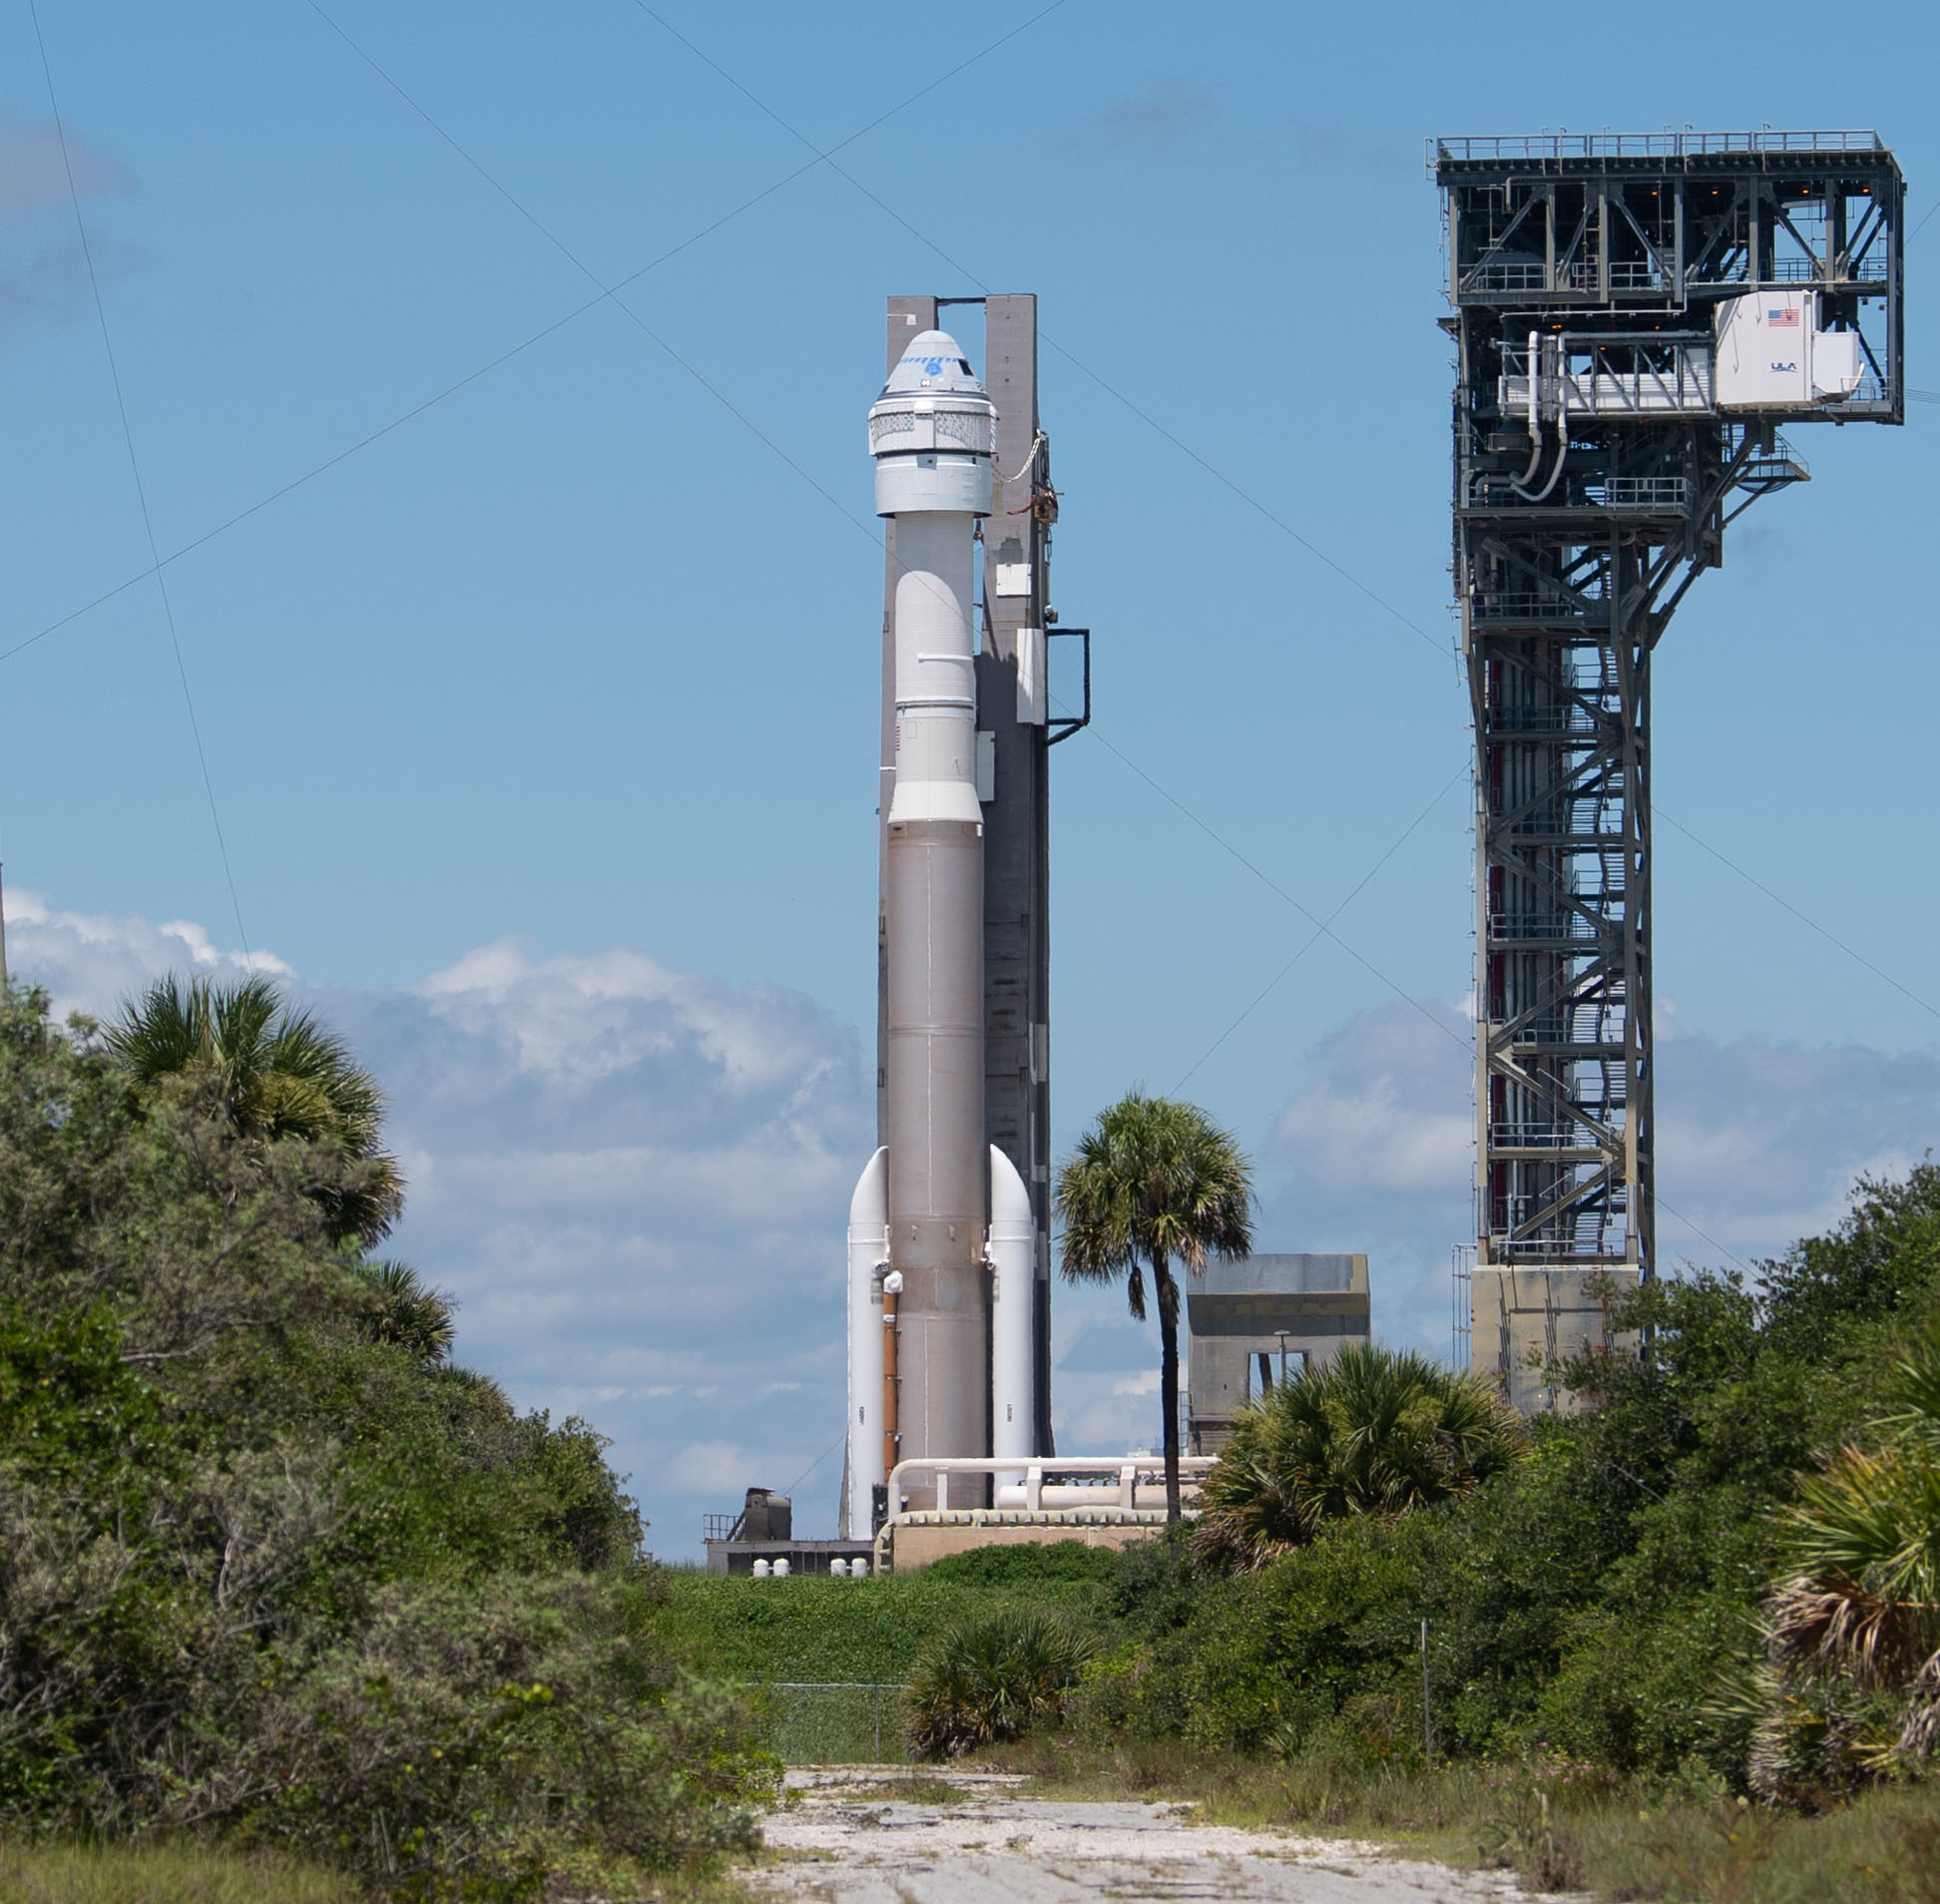 A space rocket stands vertically on the launch pad, surrounded by greenery and a blue sky with clouds, next to a tall support structure.